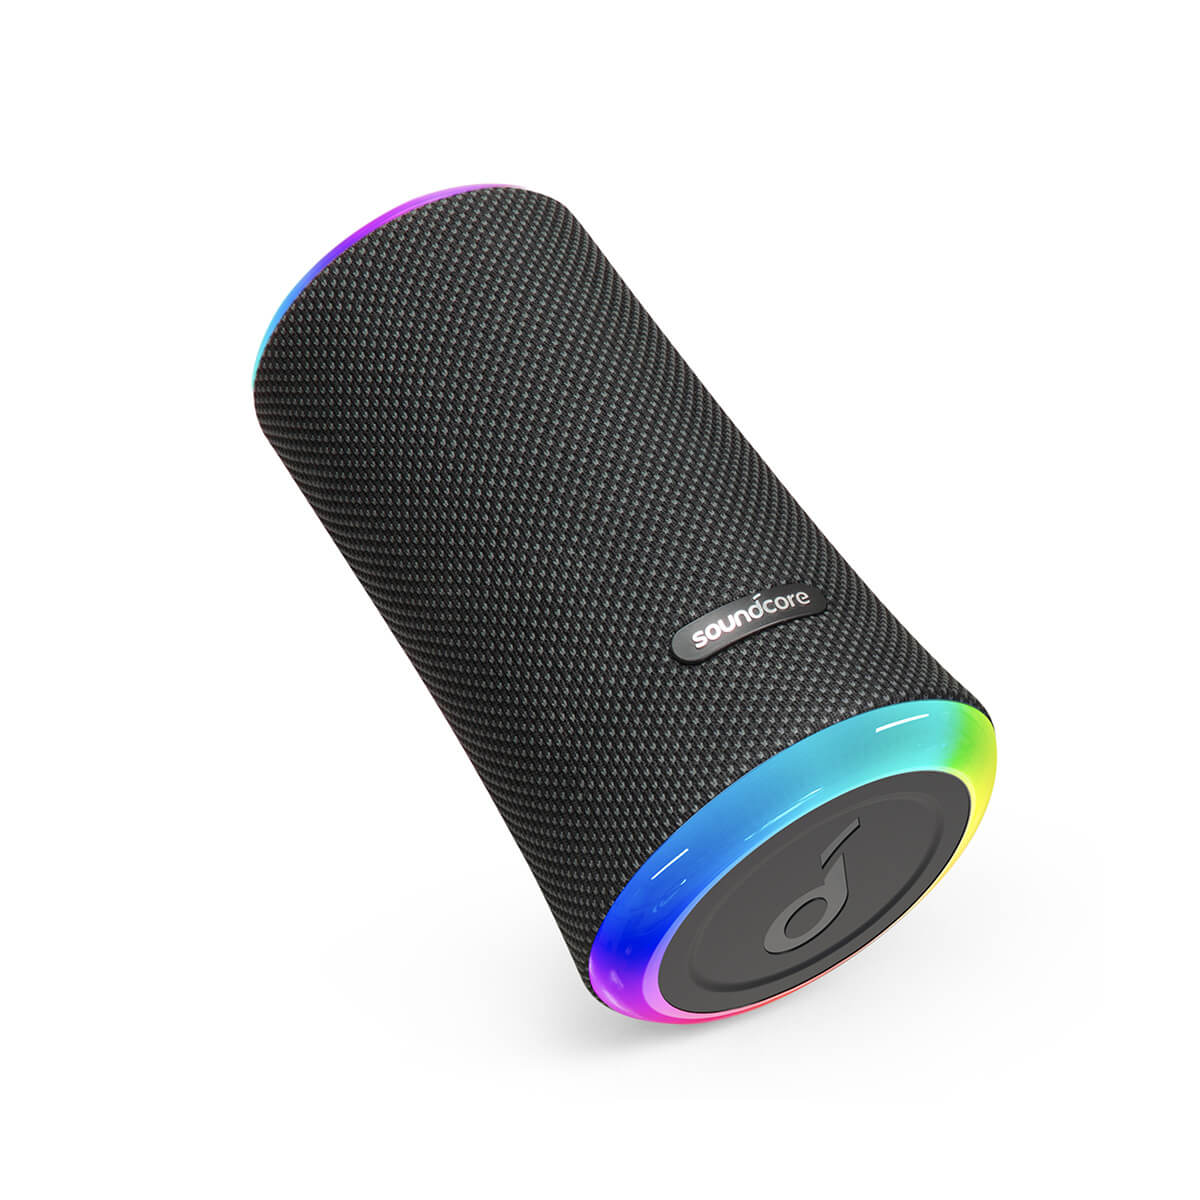 Flare 2 Bluetooth Speaker, with IPX7 Waterproof Protection and 360° Sound